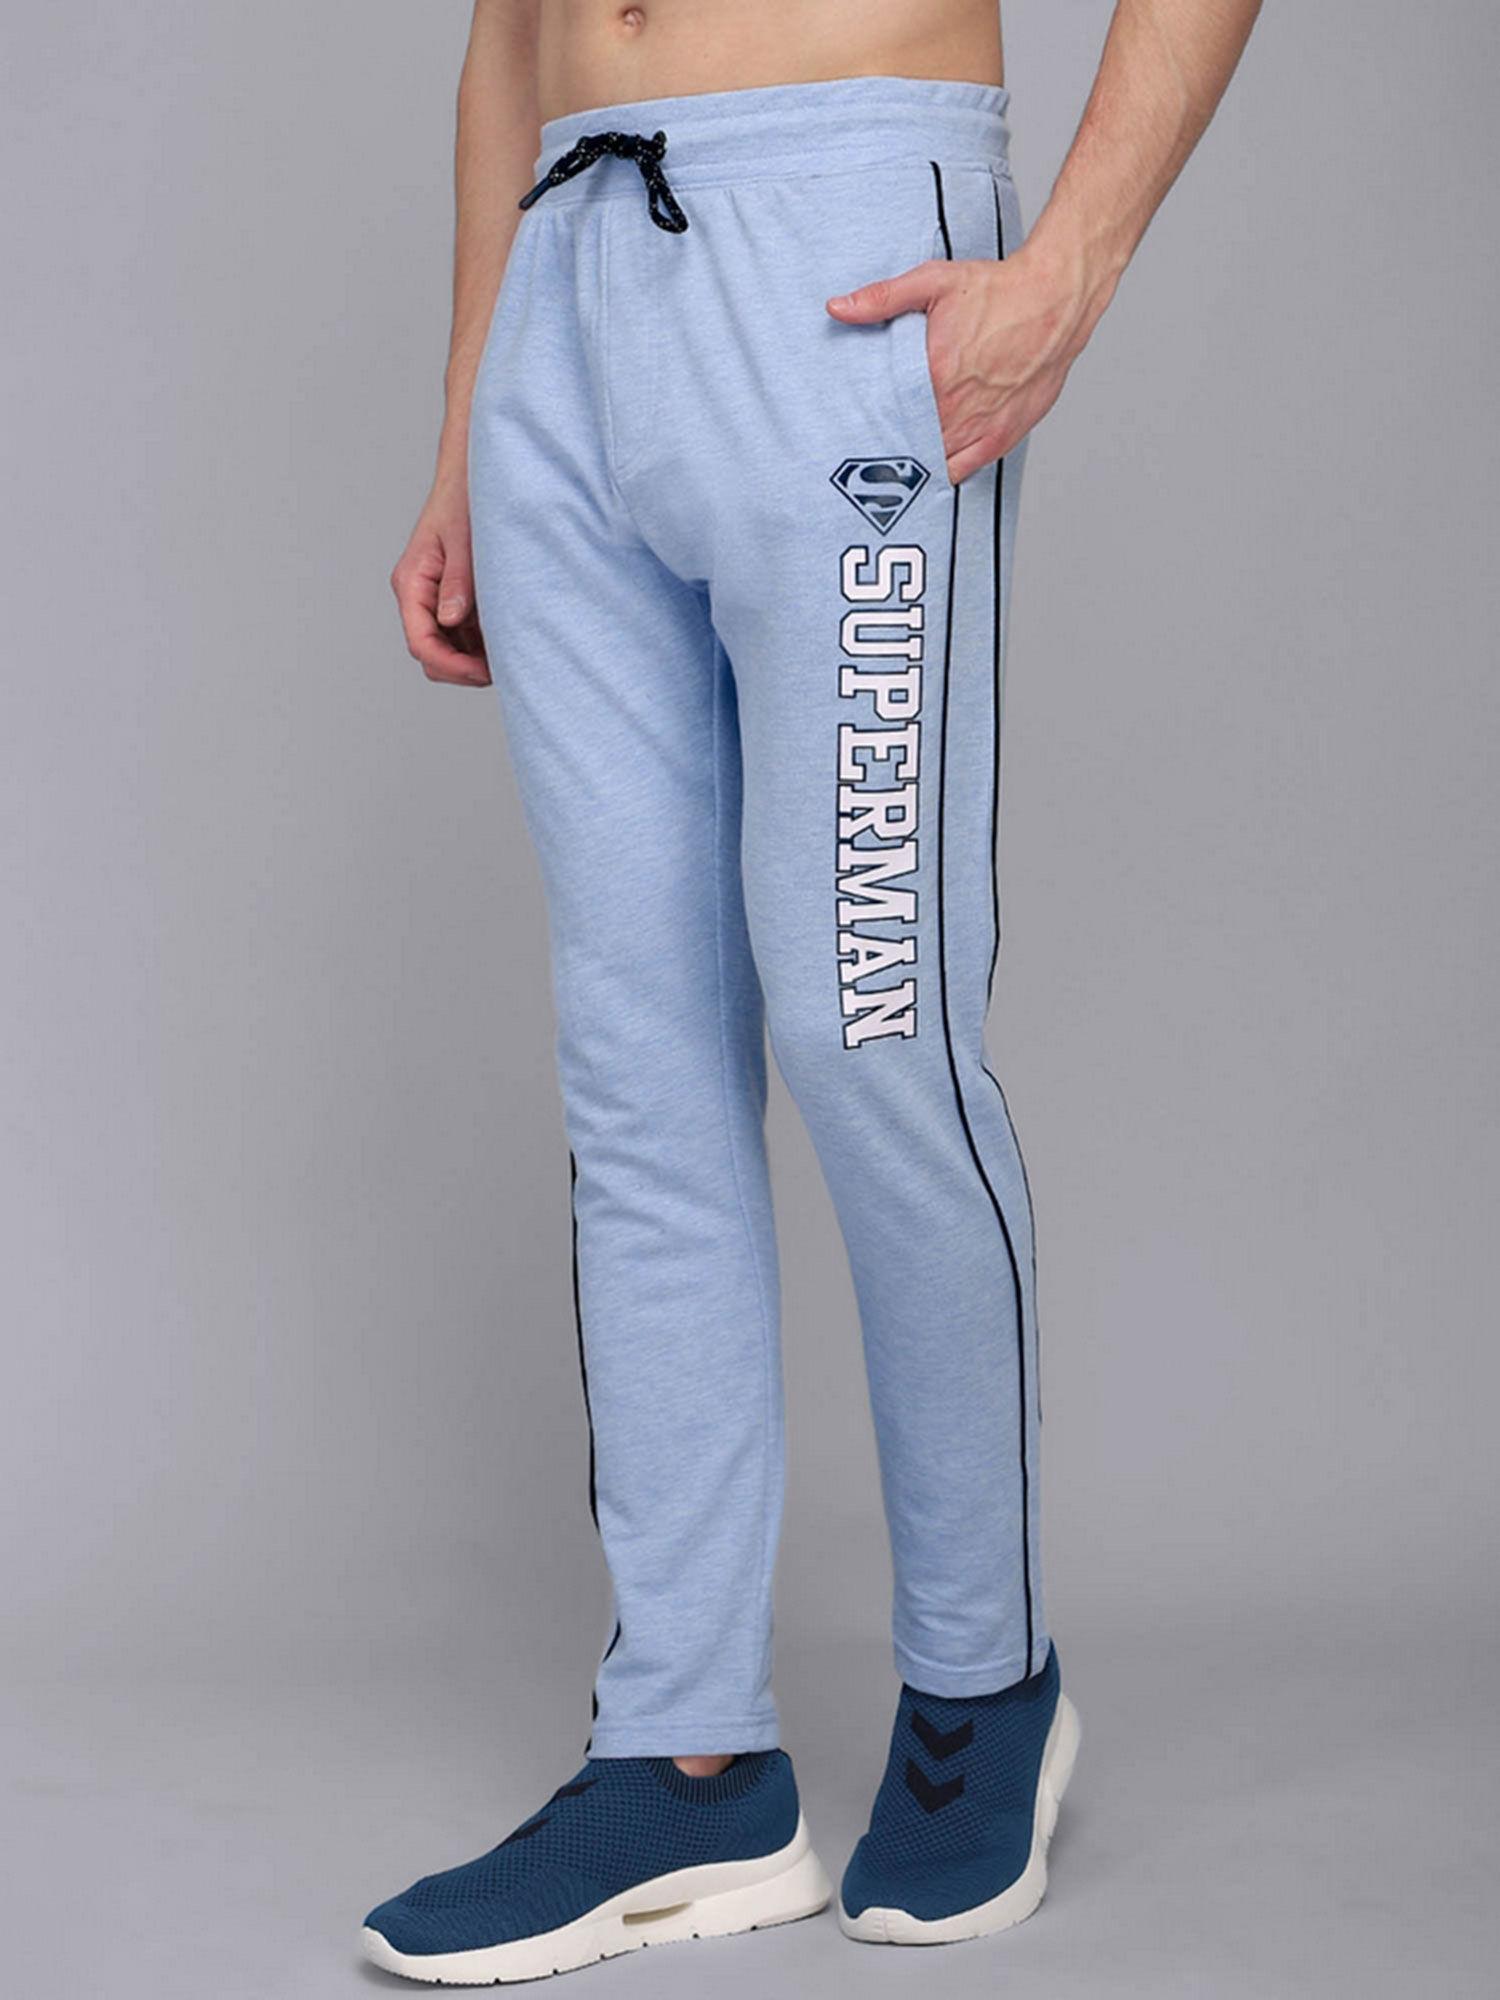 superman featured joggers for men